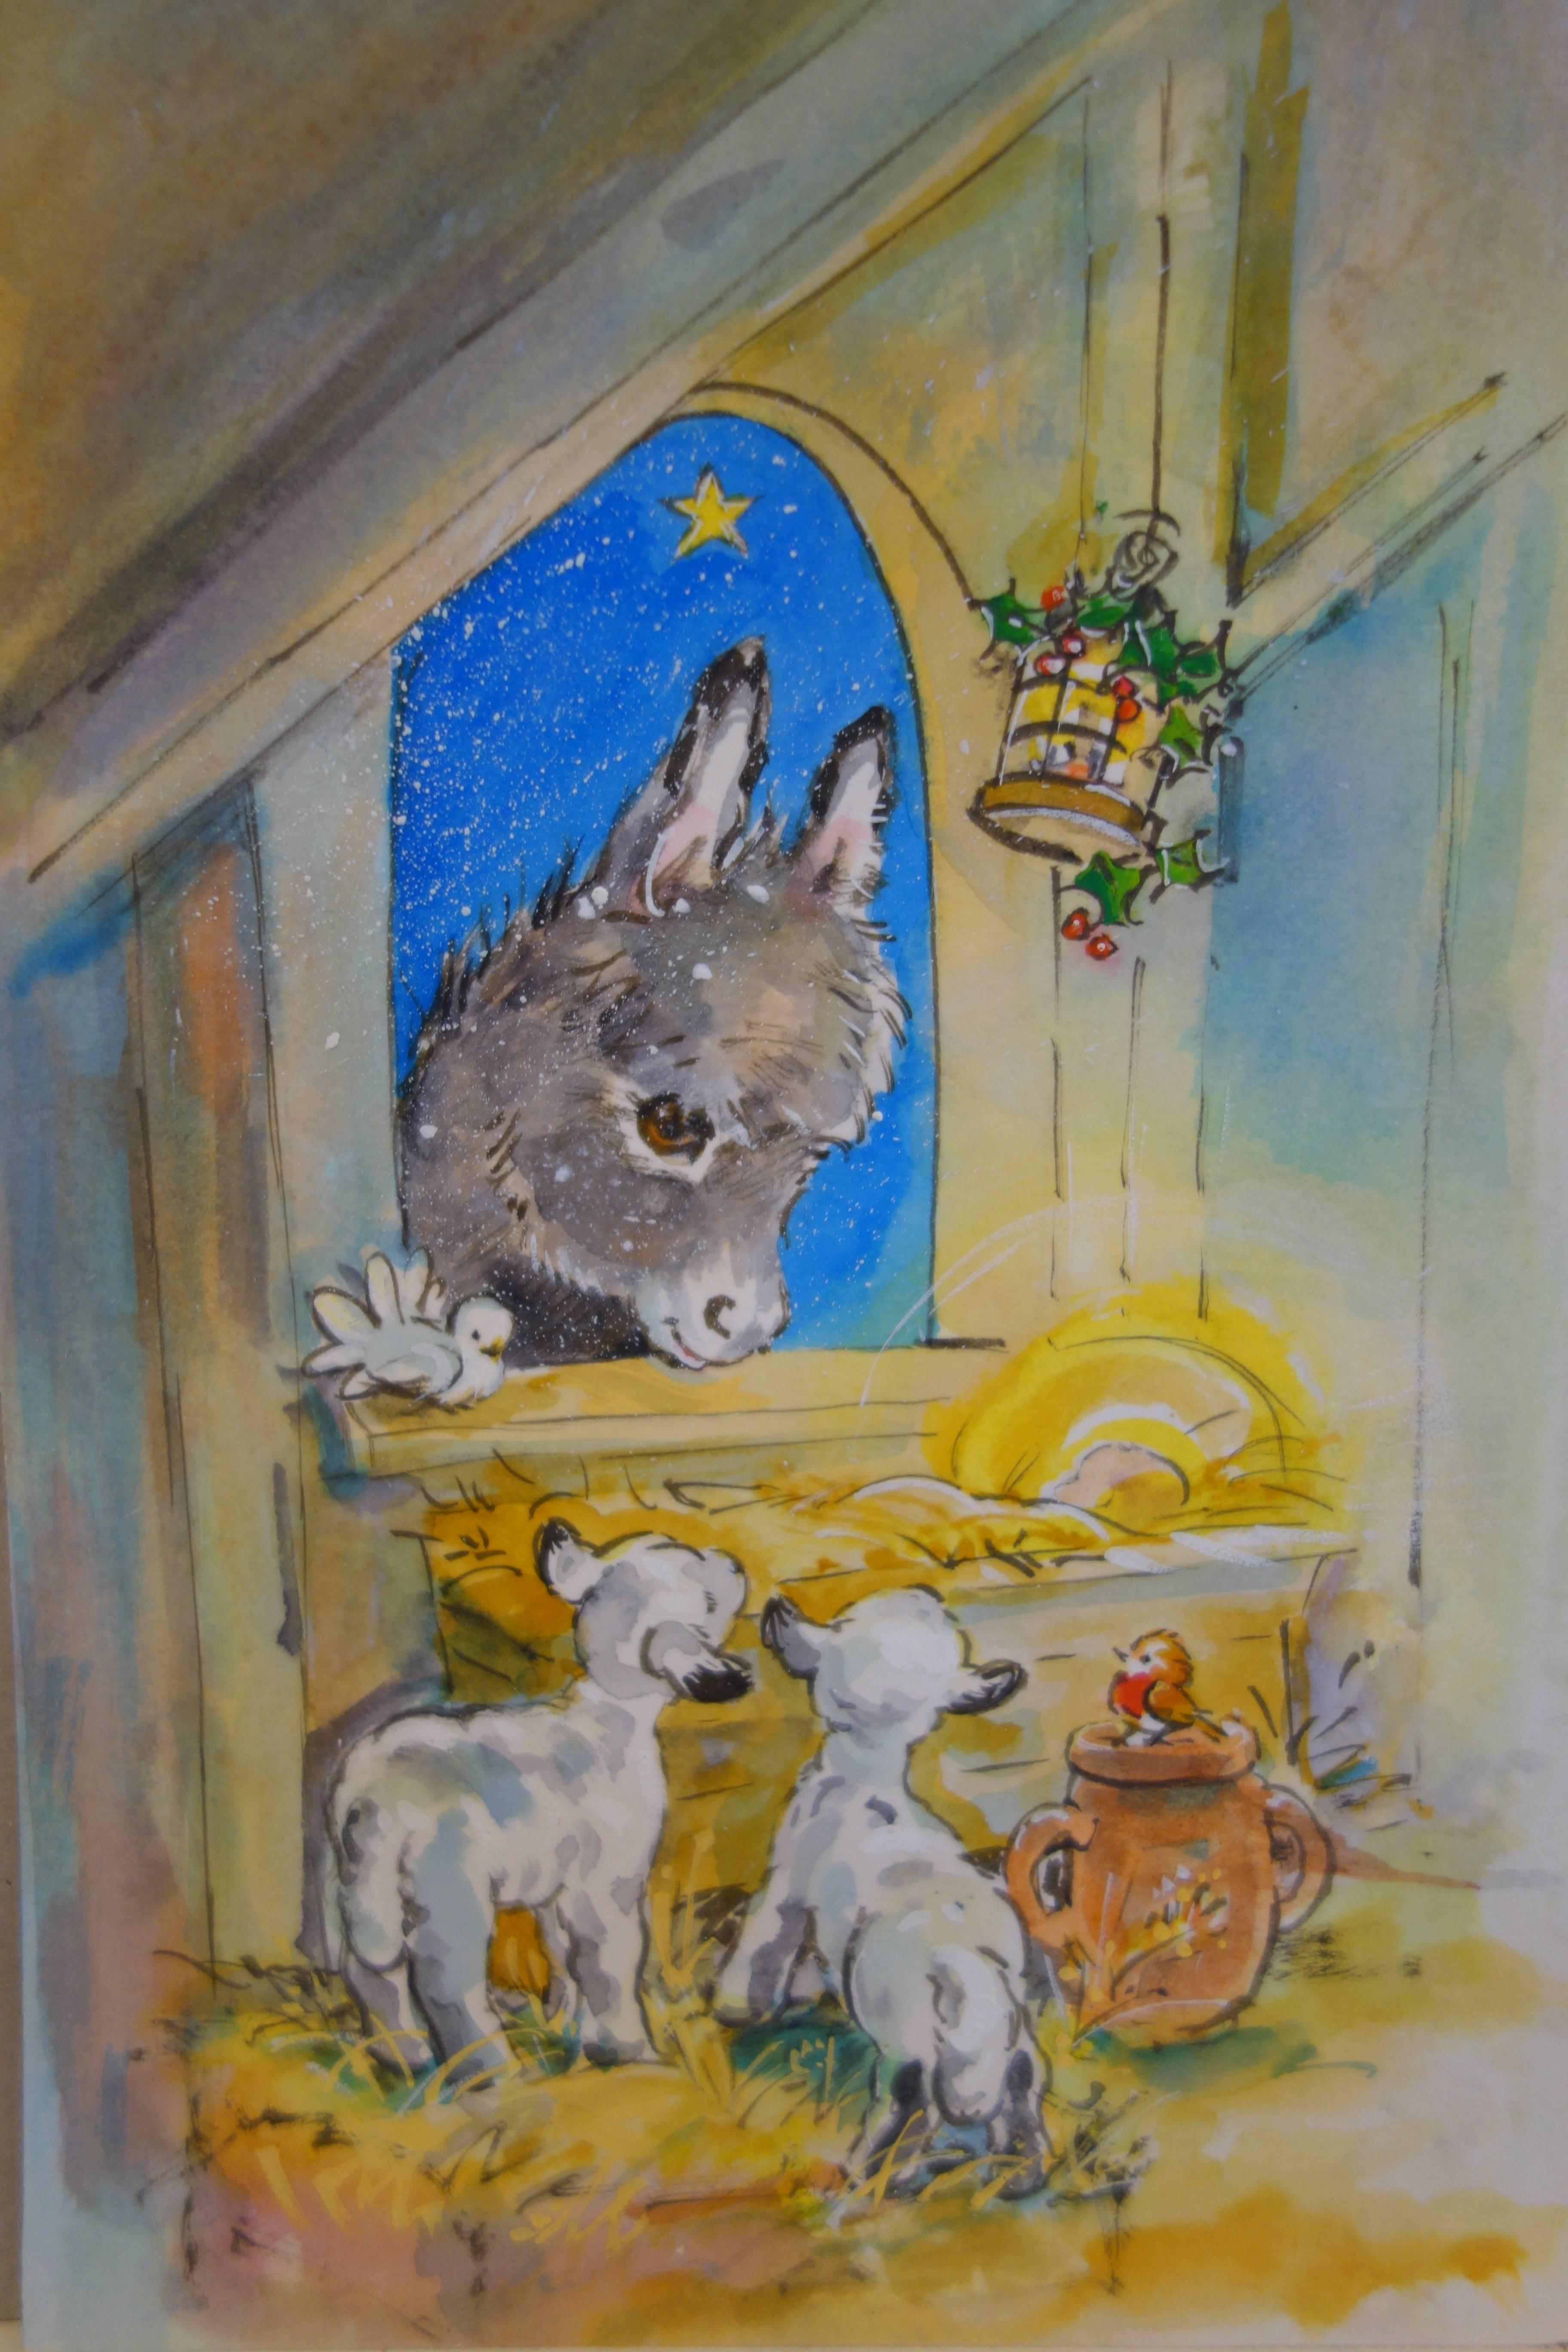 Diana Matthes Figurative Art - Christmas night with Donkeys, a Robin and Lambs in a stable by a crib